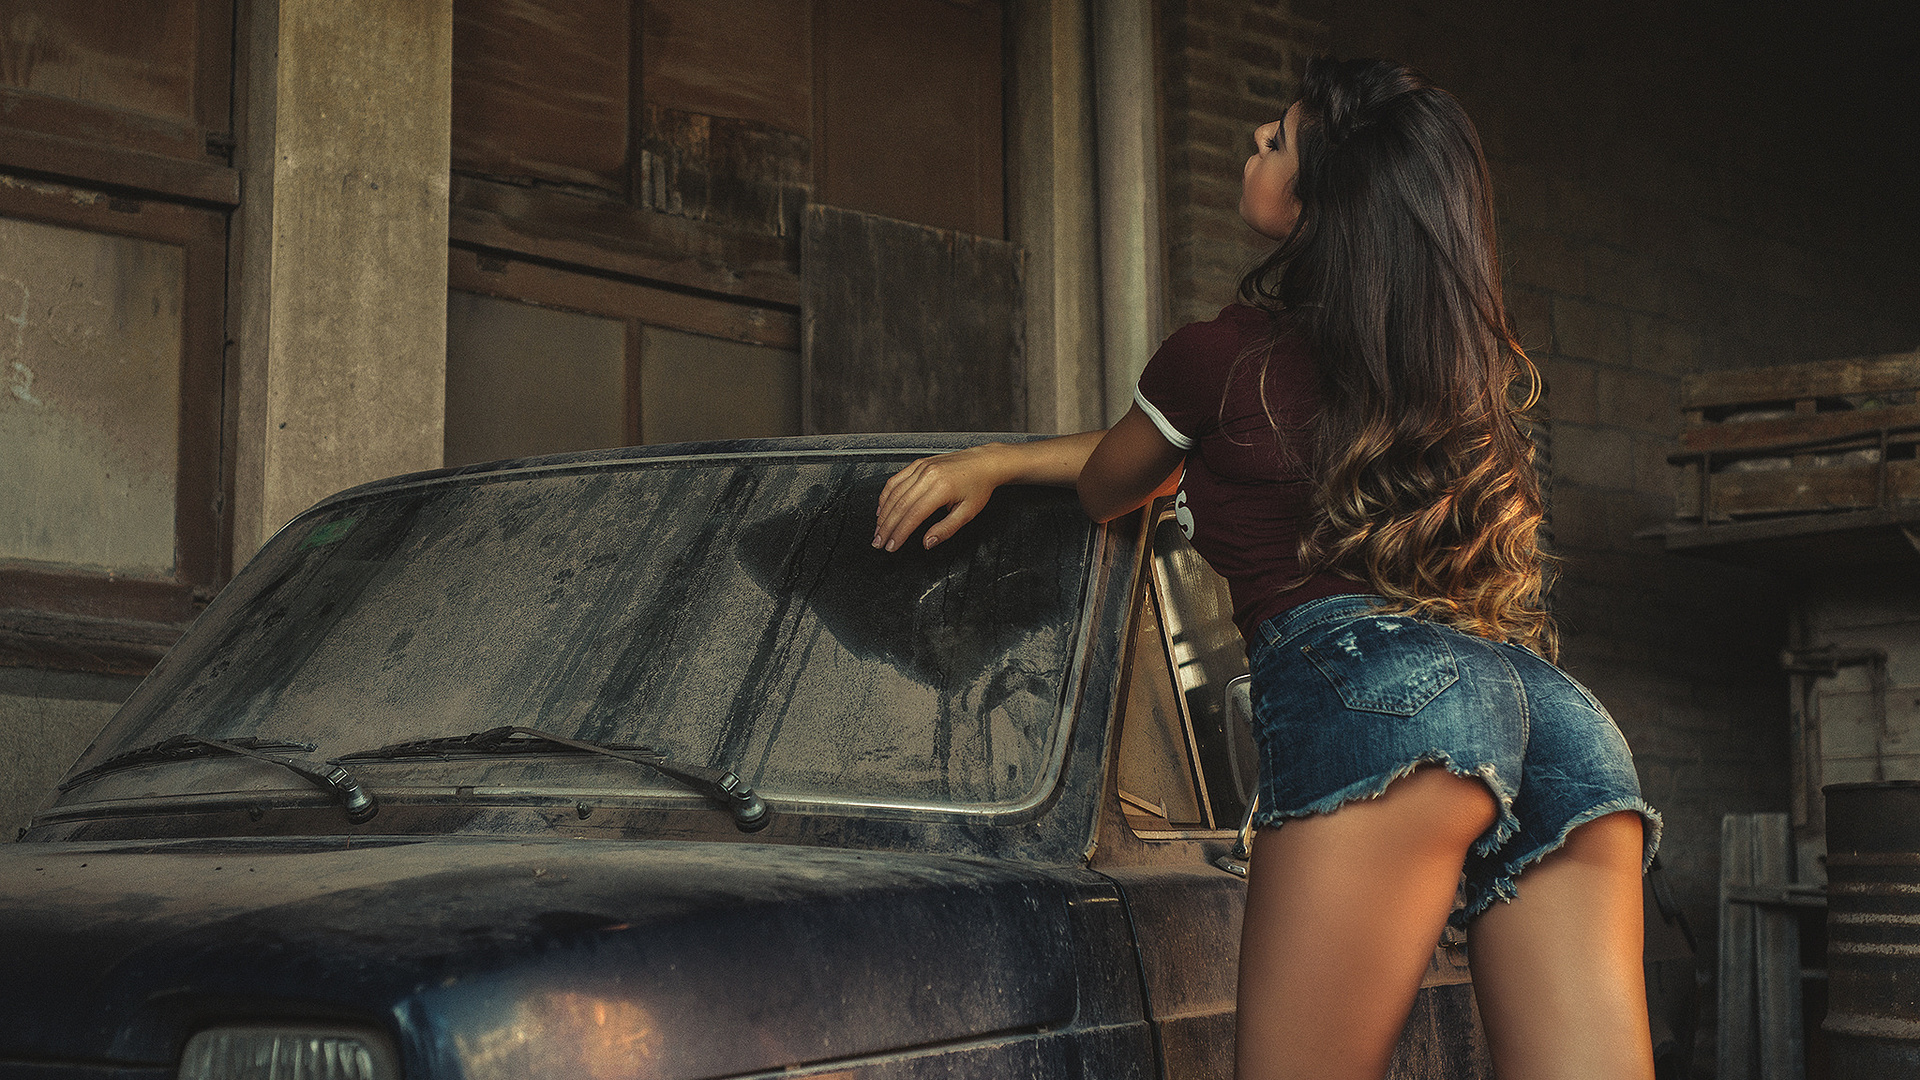 women, tanned, jean shorts, ass, women with cars, t-shirt, closed eyes, stockings, long hair